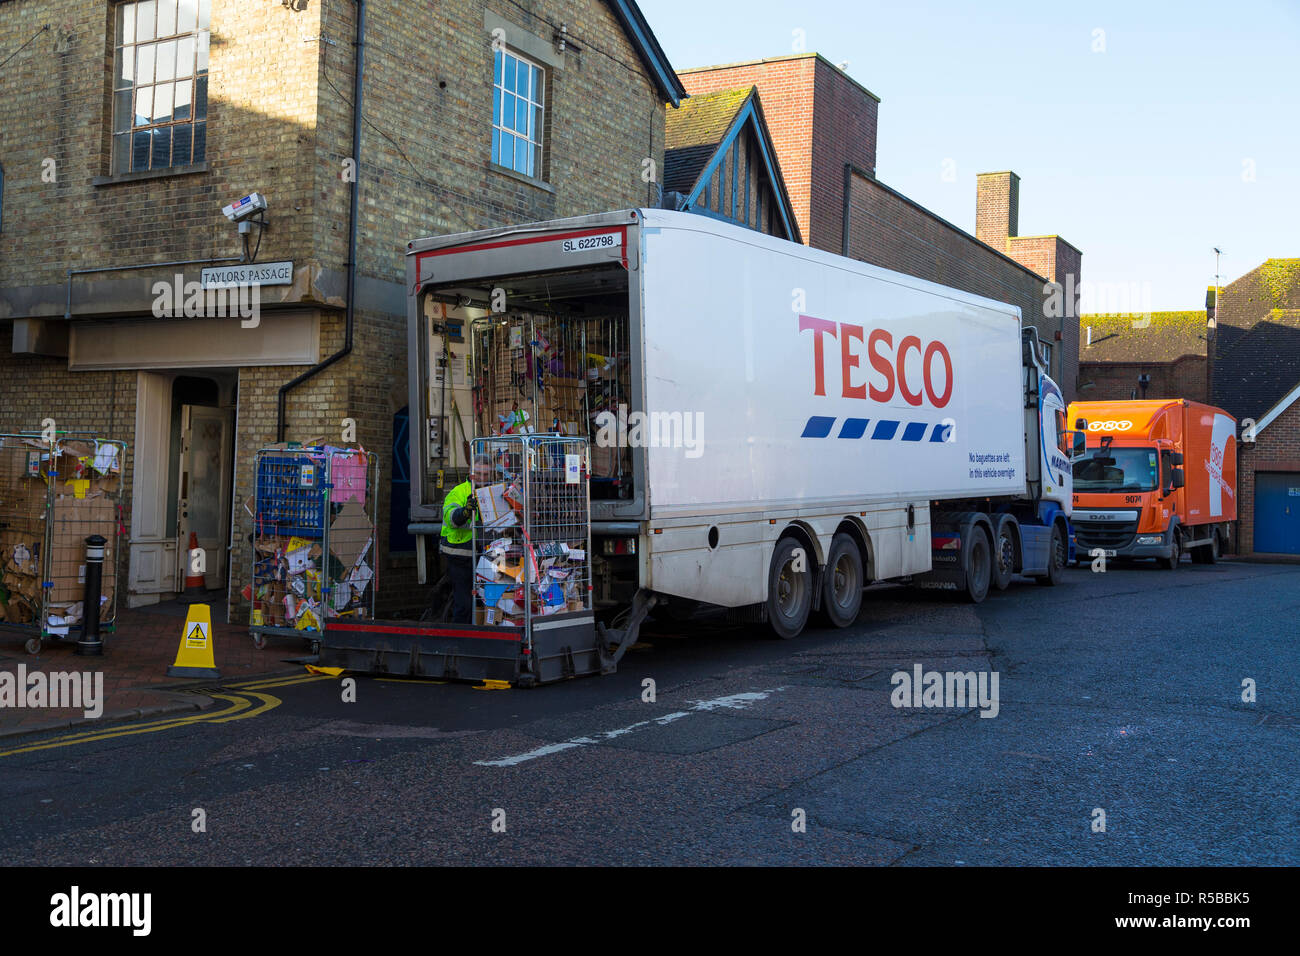 Tesco container lorry being loaded with waste cardboard, ashford, kent, uk Stock Photo